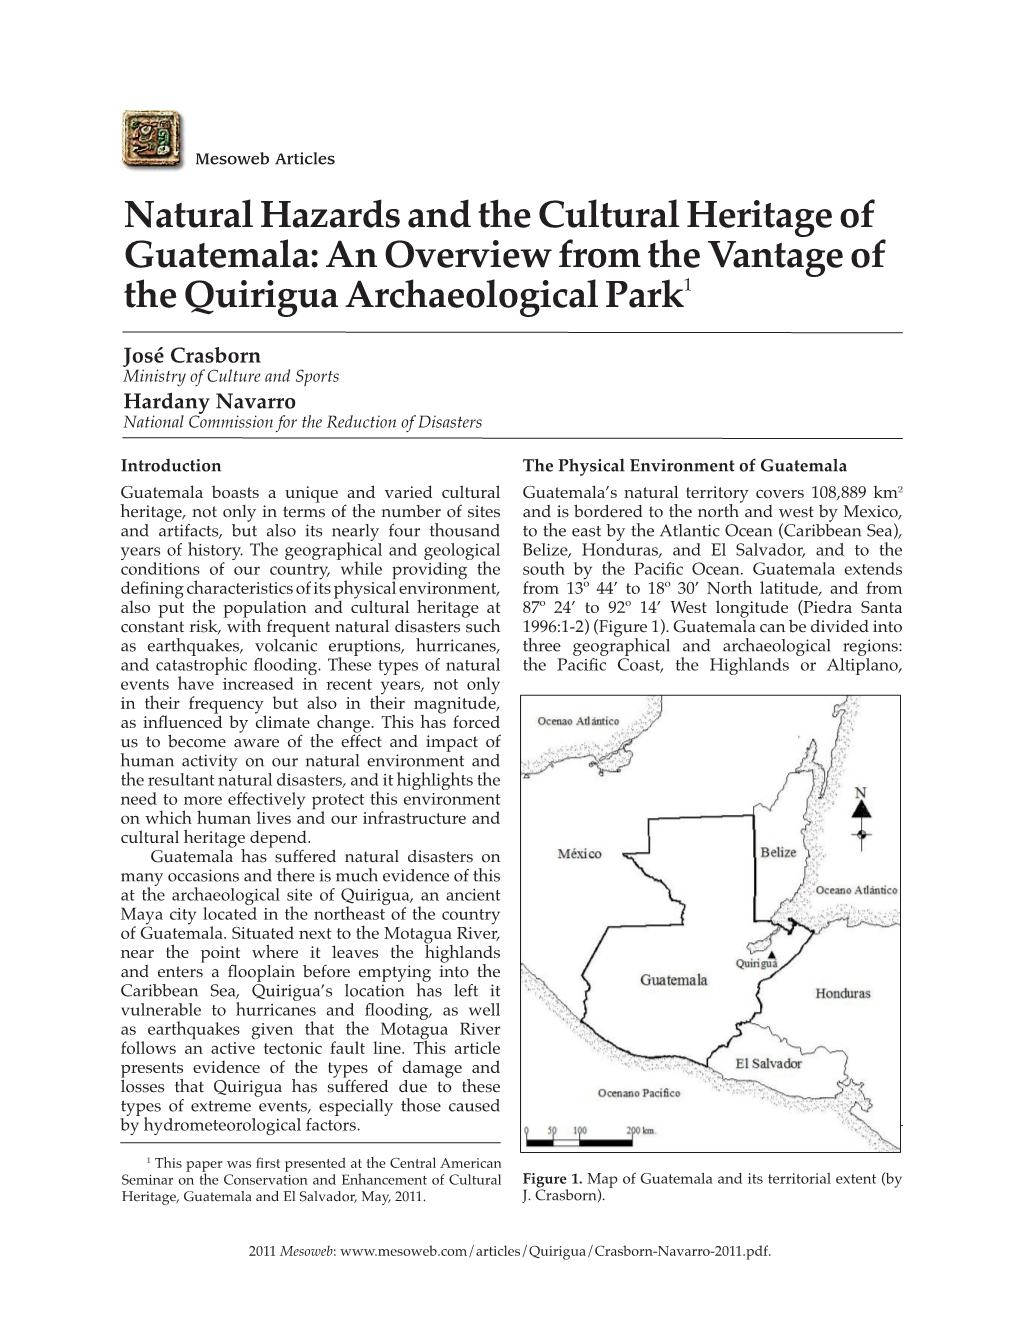 Natural Hazards and the Cultural Heritage of Guatemala: an Overview from the Vantageof the Quirigua Archaeological Park1